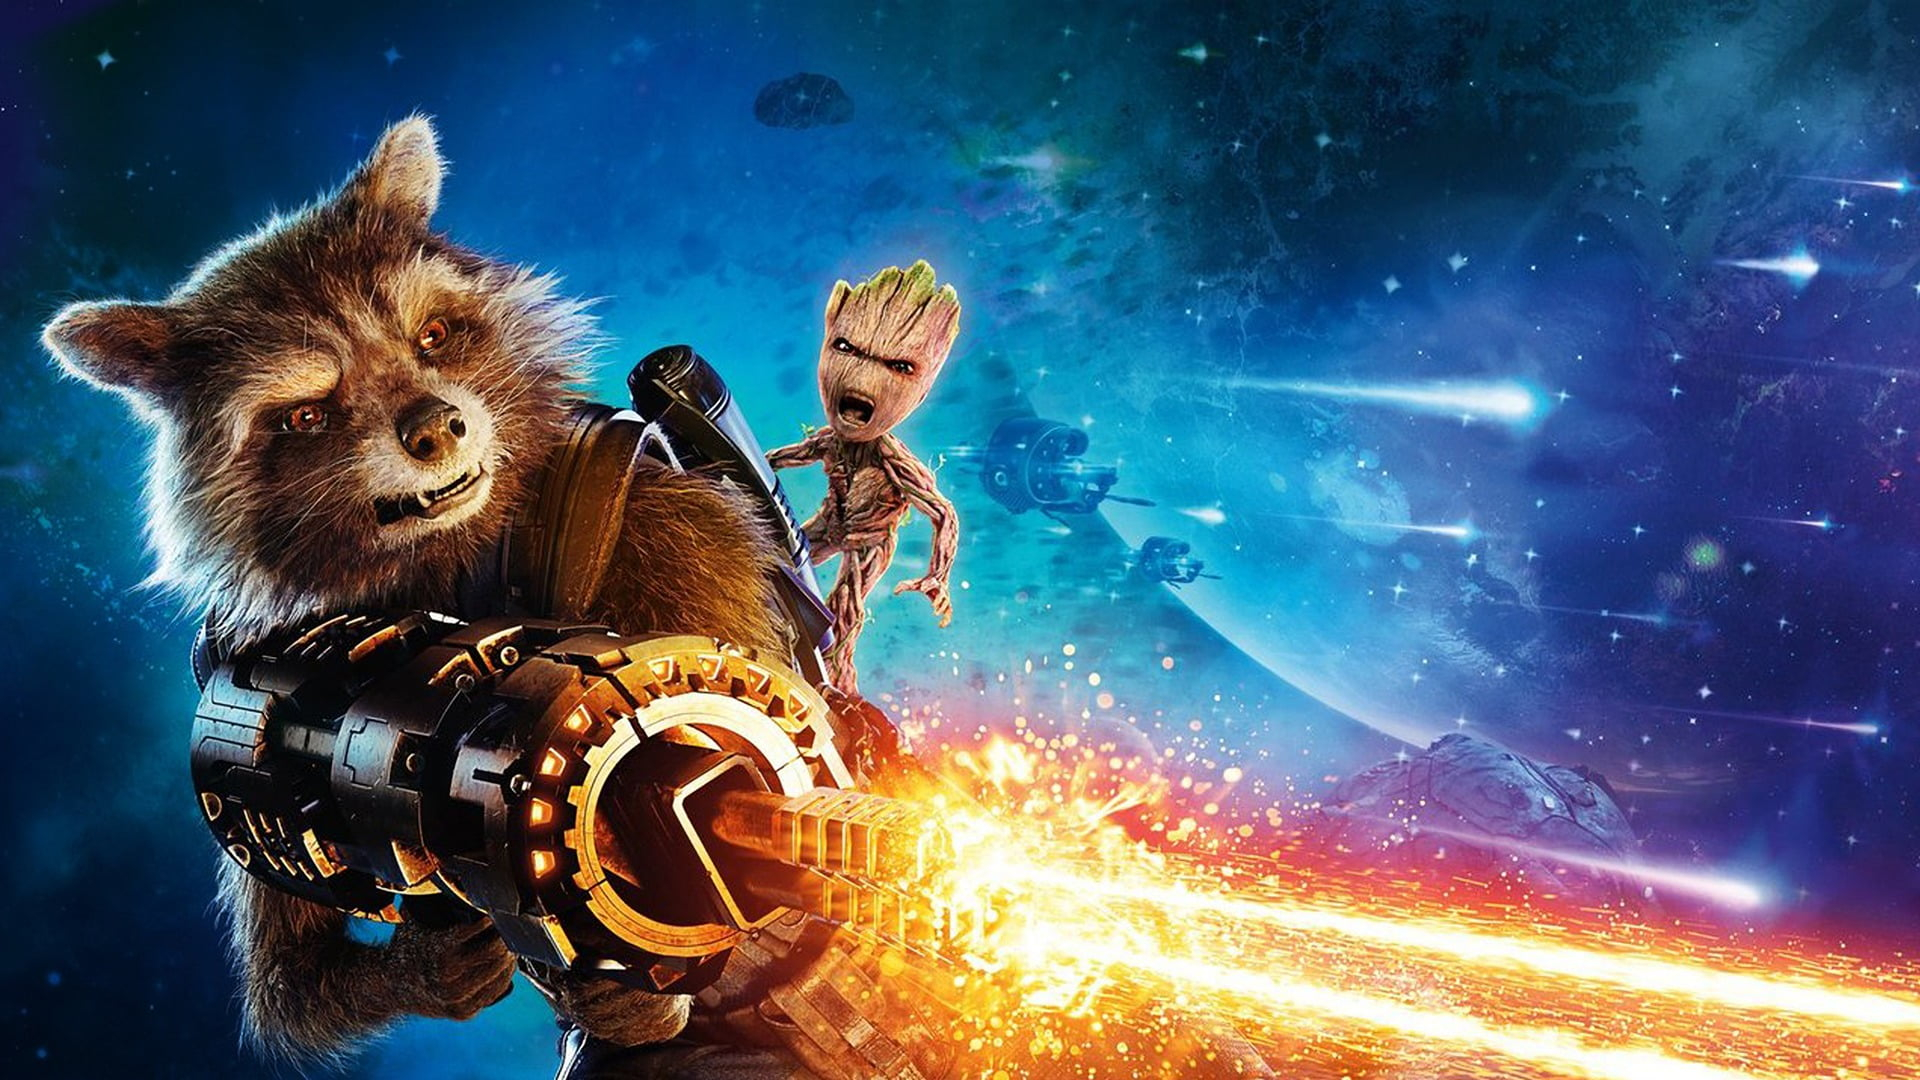 Guardians of The Galaxy Rocket and Groot digital wallpaper, Guardians